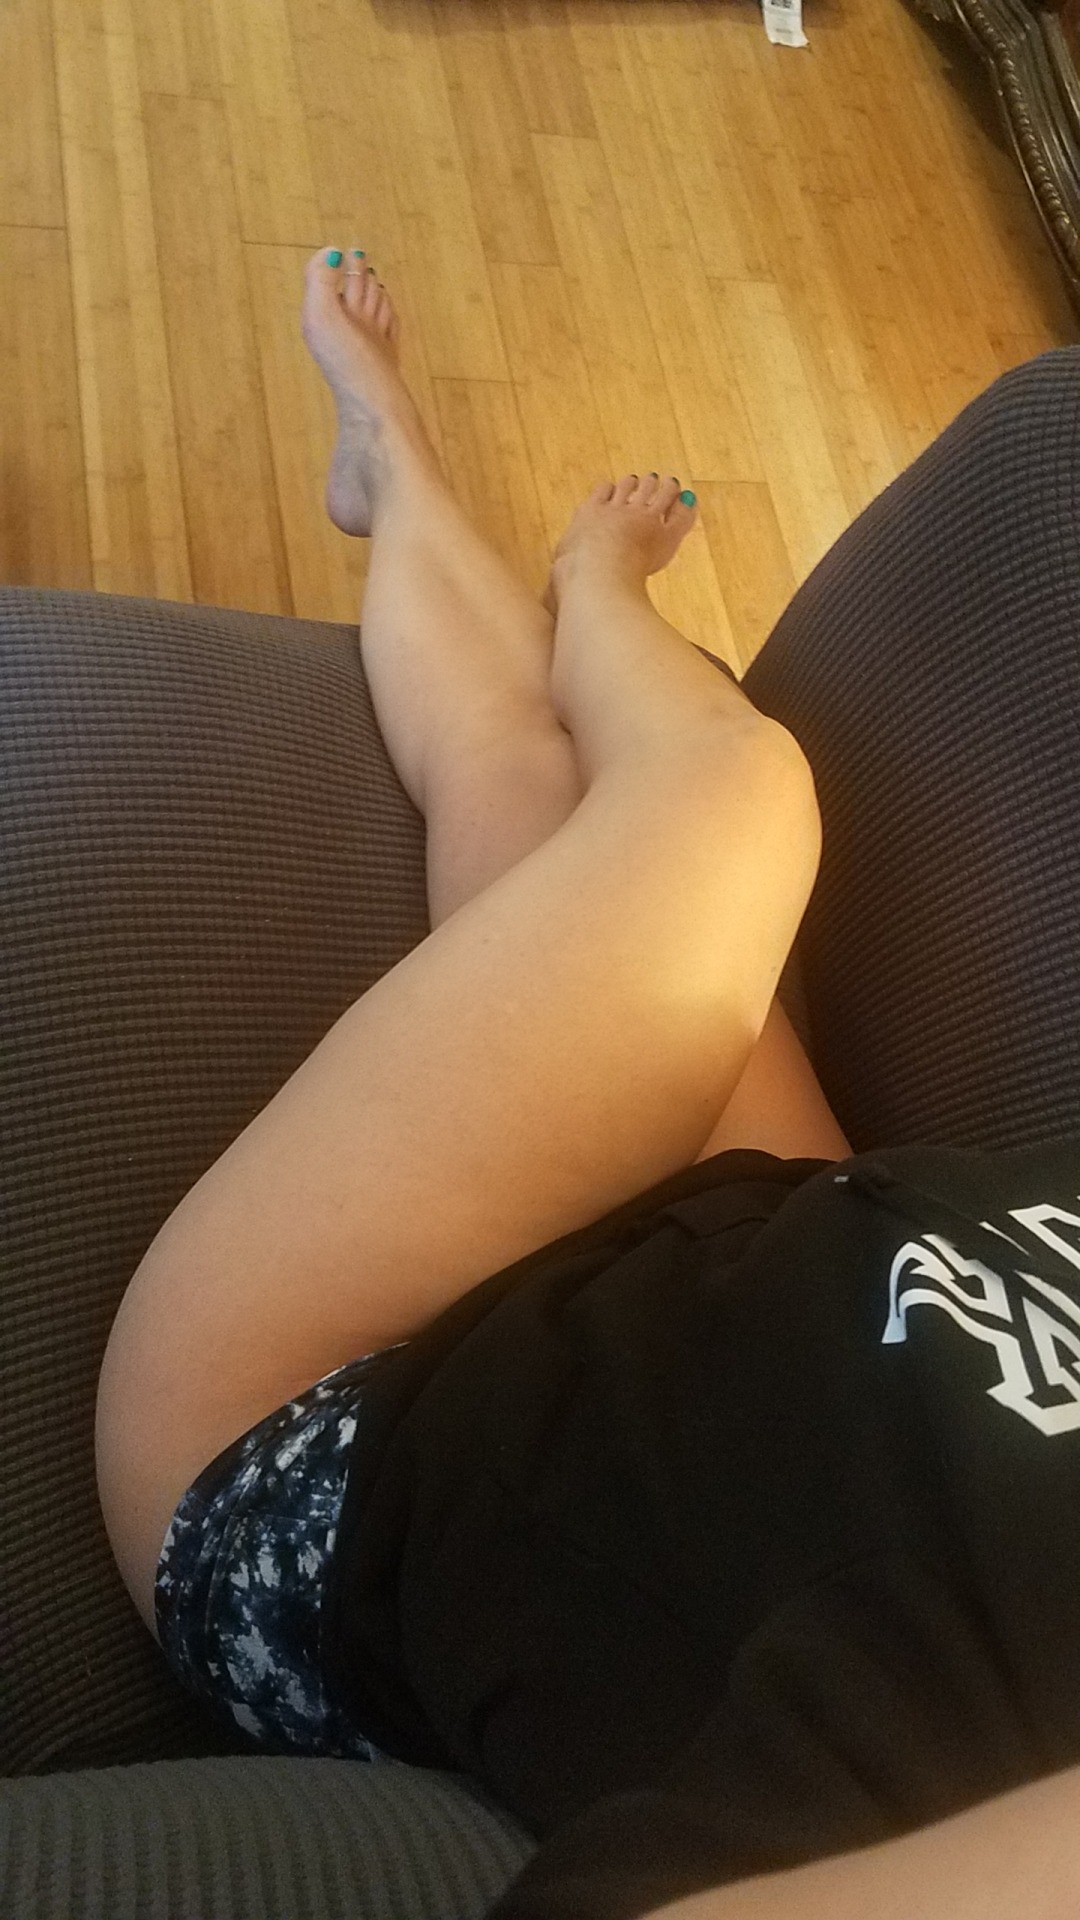 myprettywifesfeet:A very cute view of her beautiful hips,legs and feet.please comment